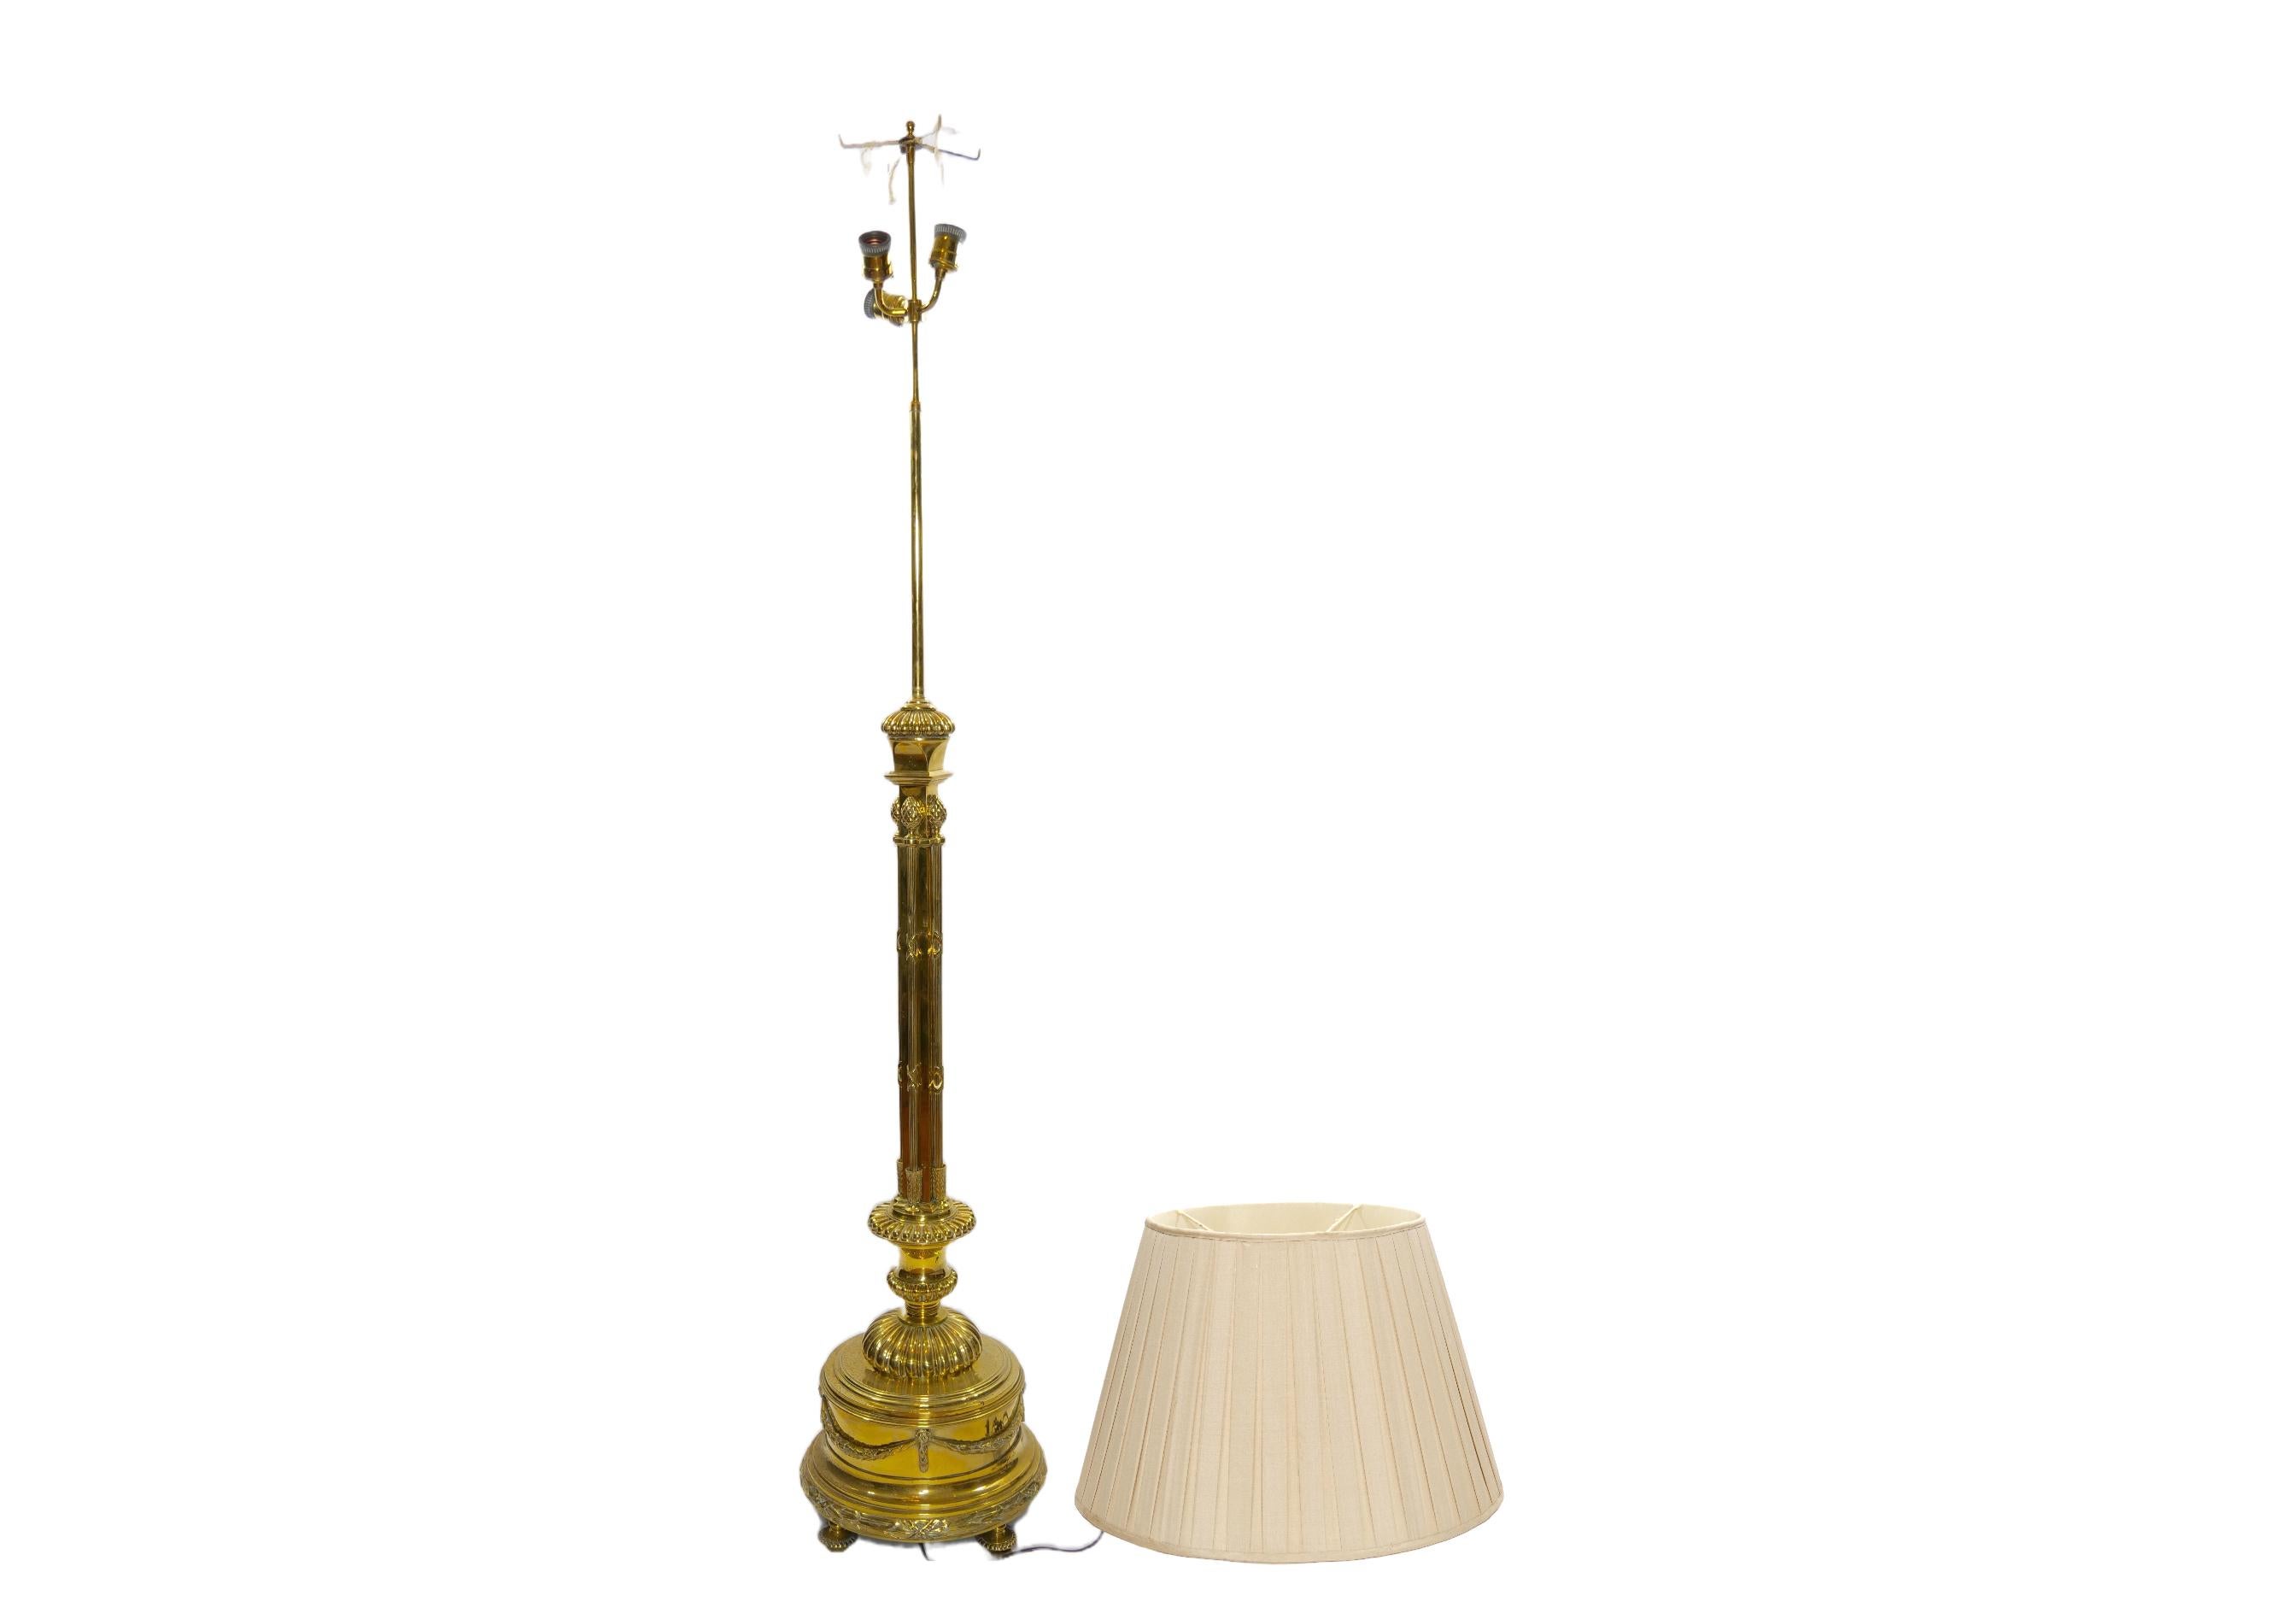 Late 19th century hand crafted gilt solid brass with footed round base Italian floor lamp. The floor lamp features a very slender shape with a heavy footed base with exterior garland wreath design details . The lamp comes with a round linen pleated